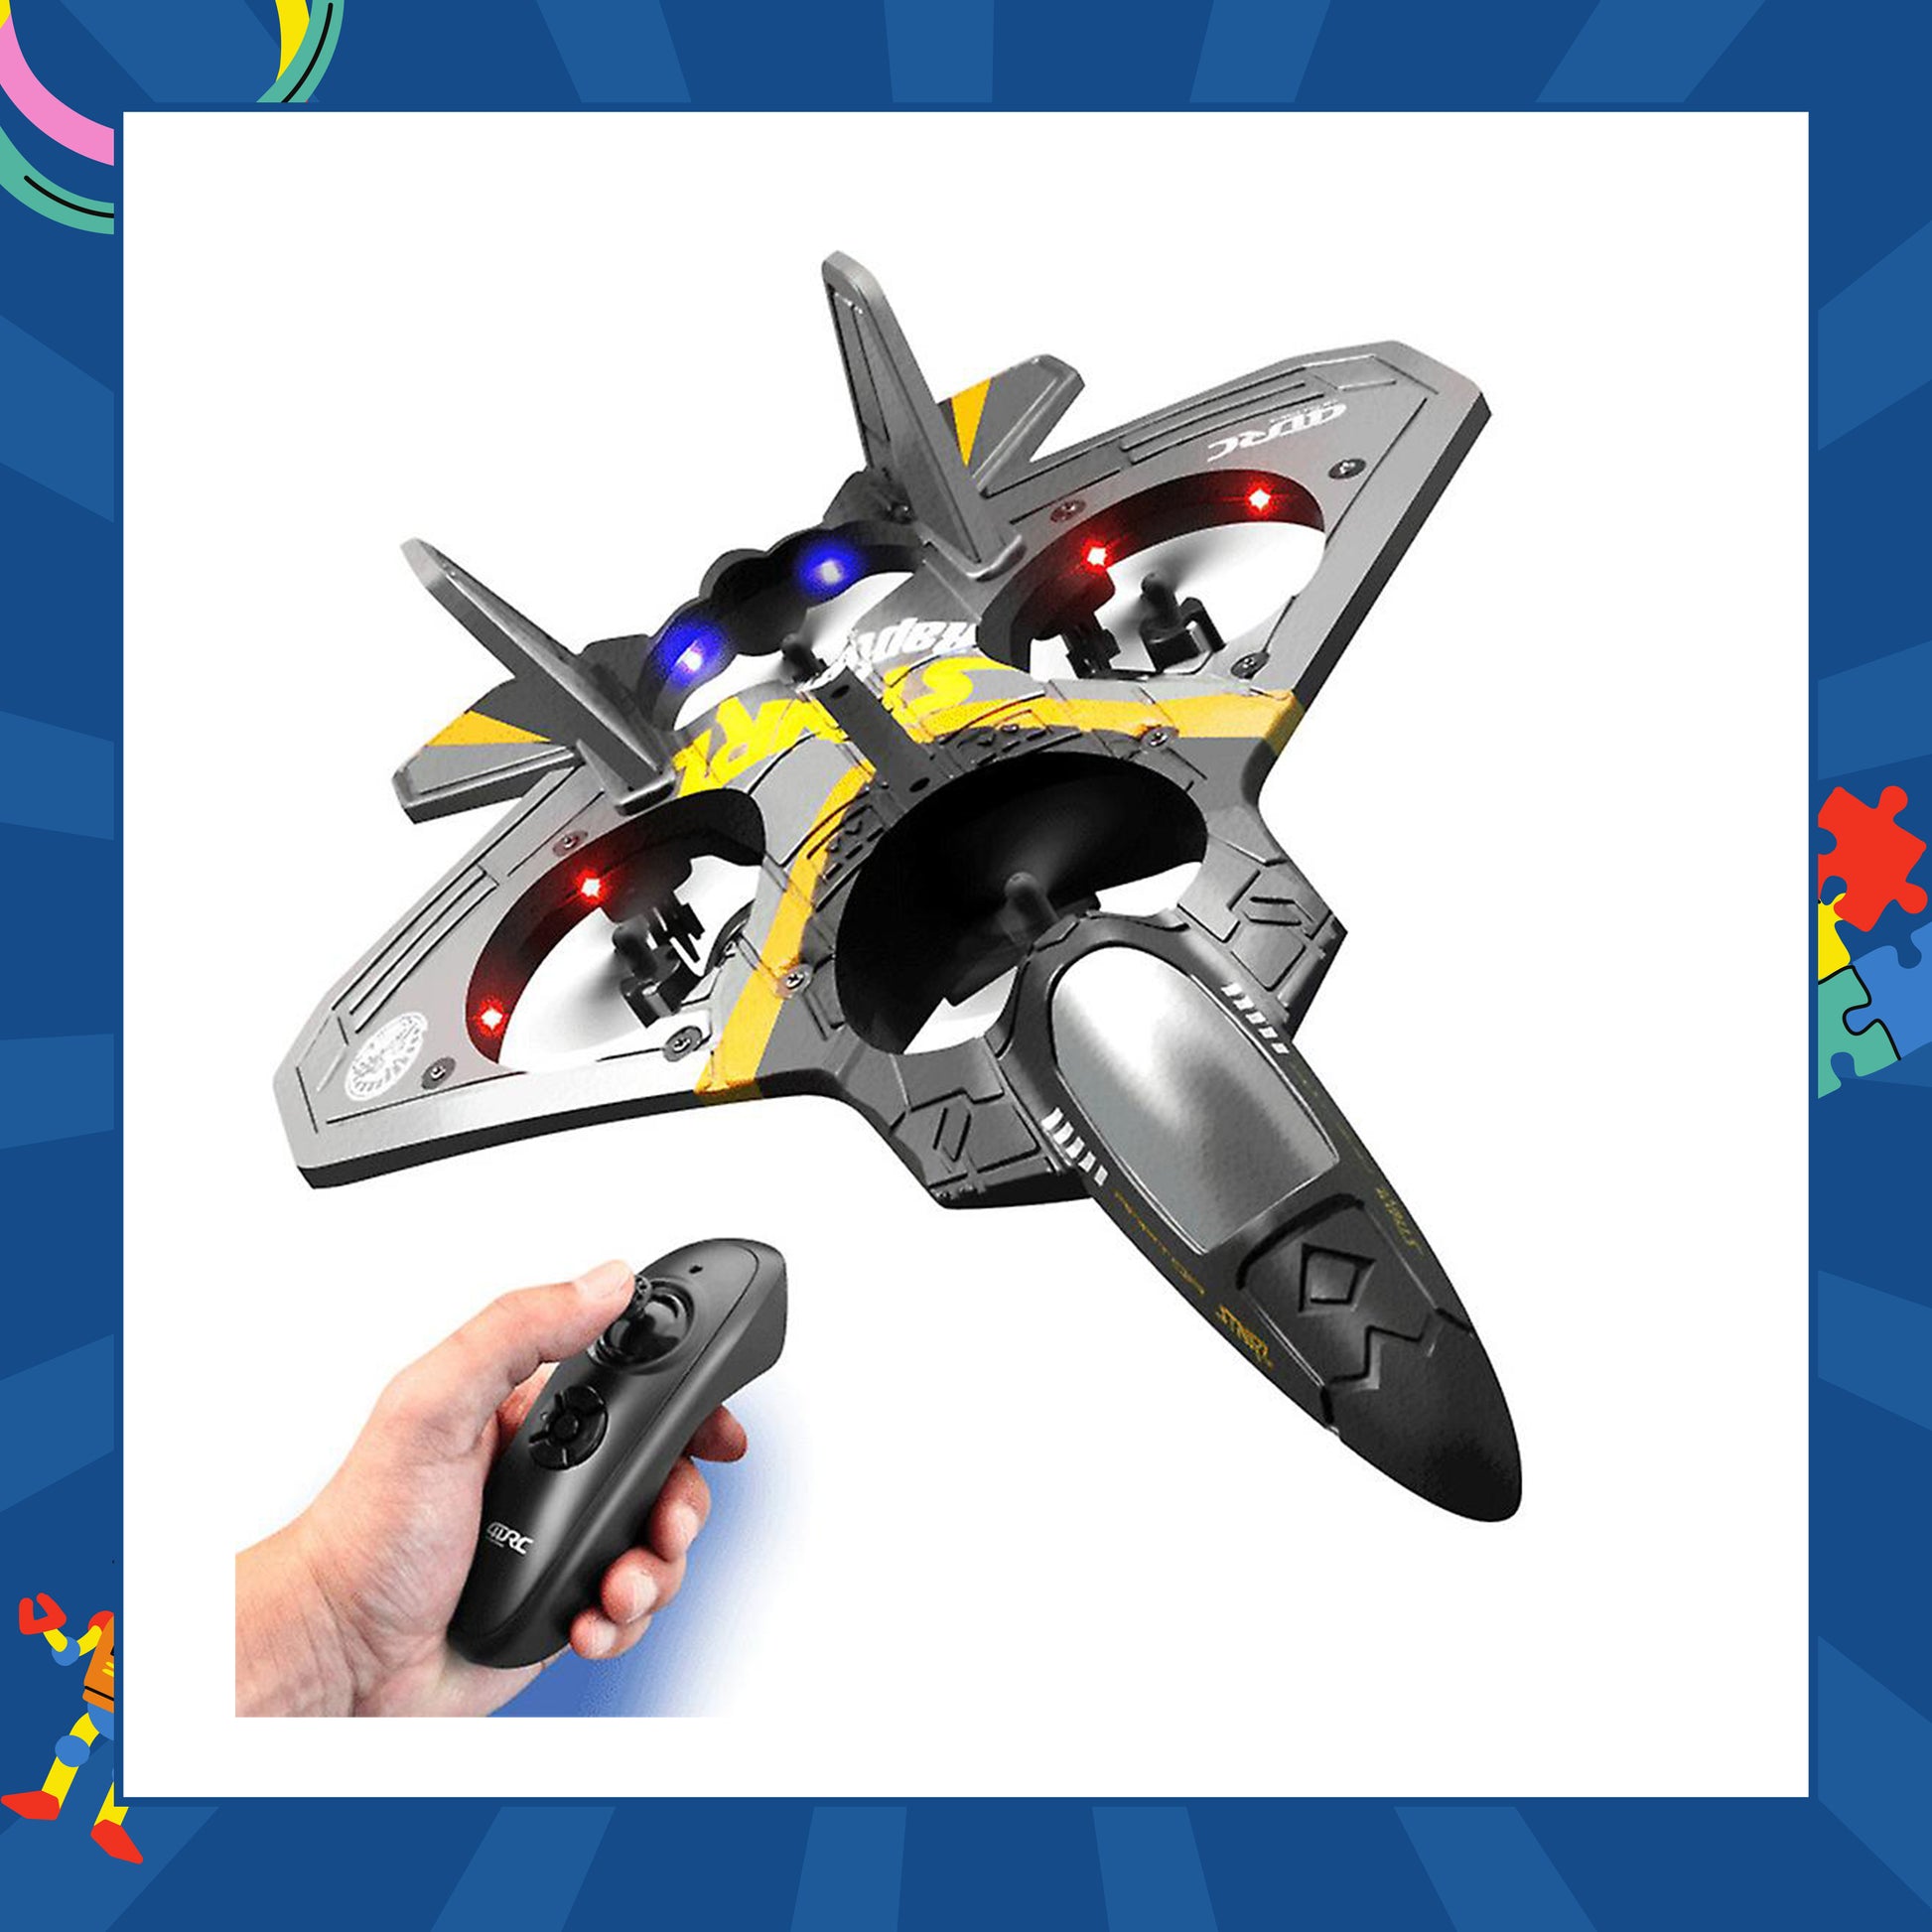 SkyRider Remote Fighter Jet - High-Flying Remote Control Aircraft - Smart - Toy - Plane - Grey - Gravity - Sensor - Toy - Drone